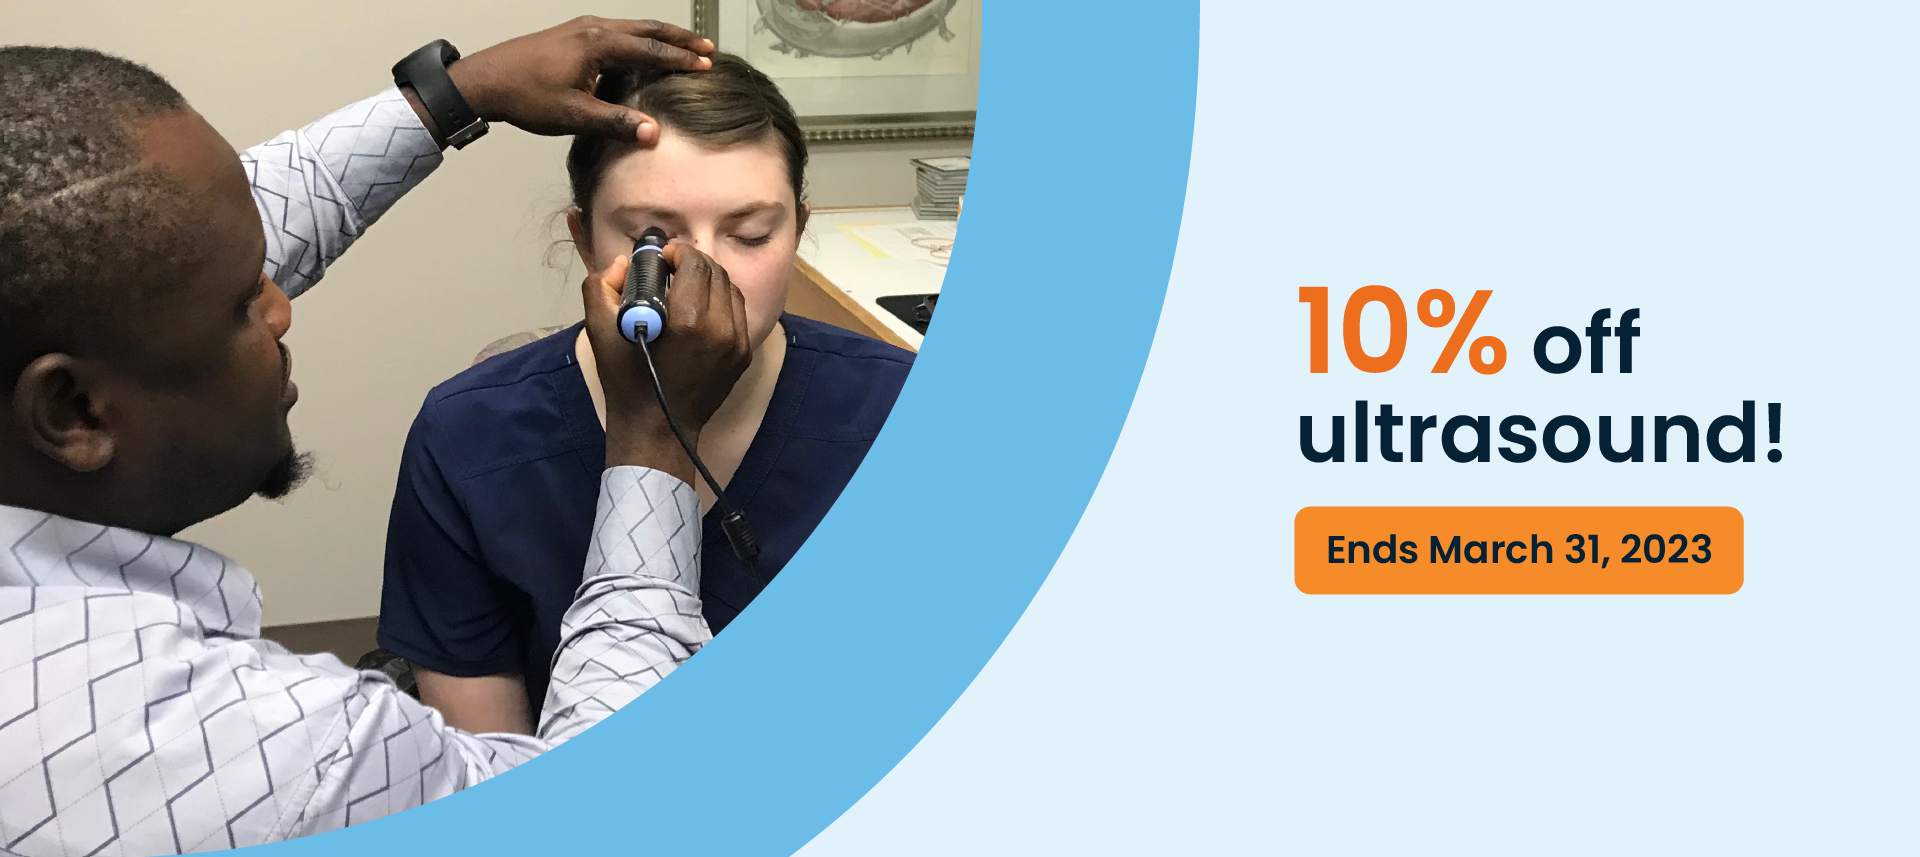 10% off ultrasound trade-in